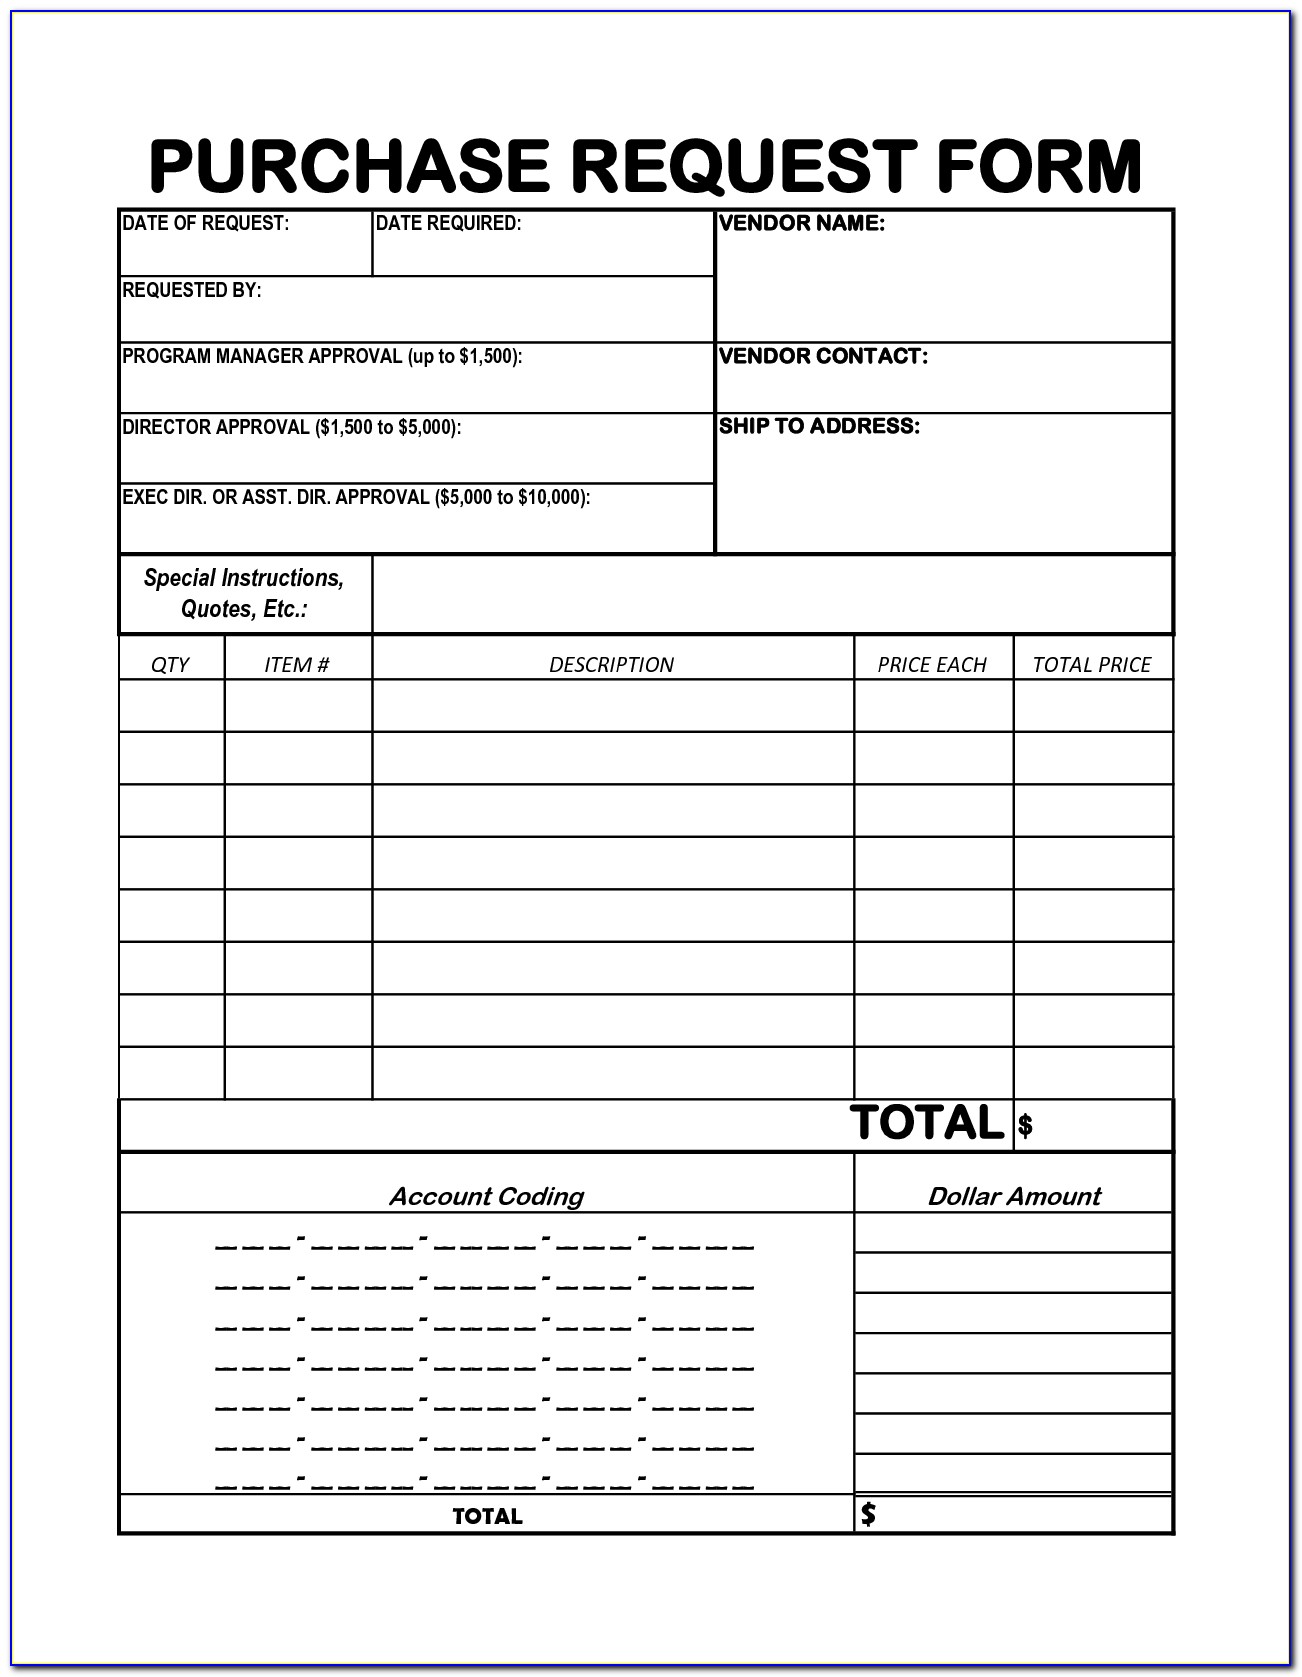 Purchase Request Form Template Free